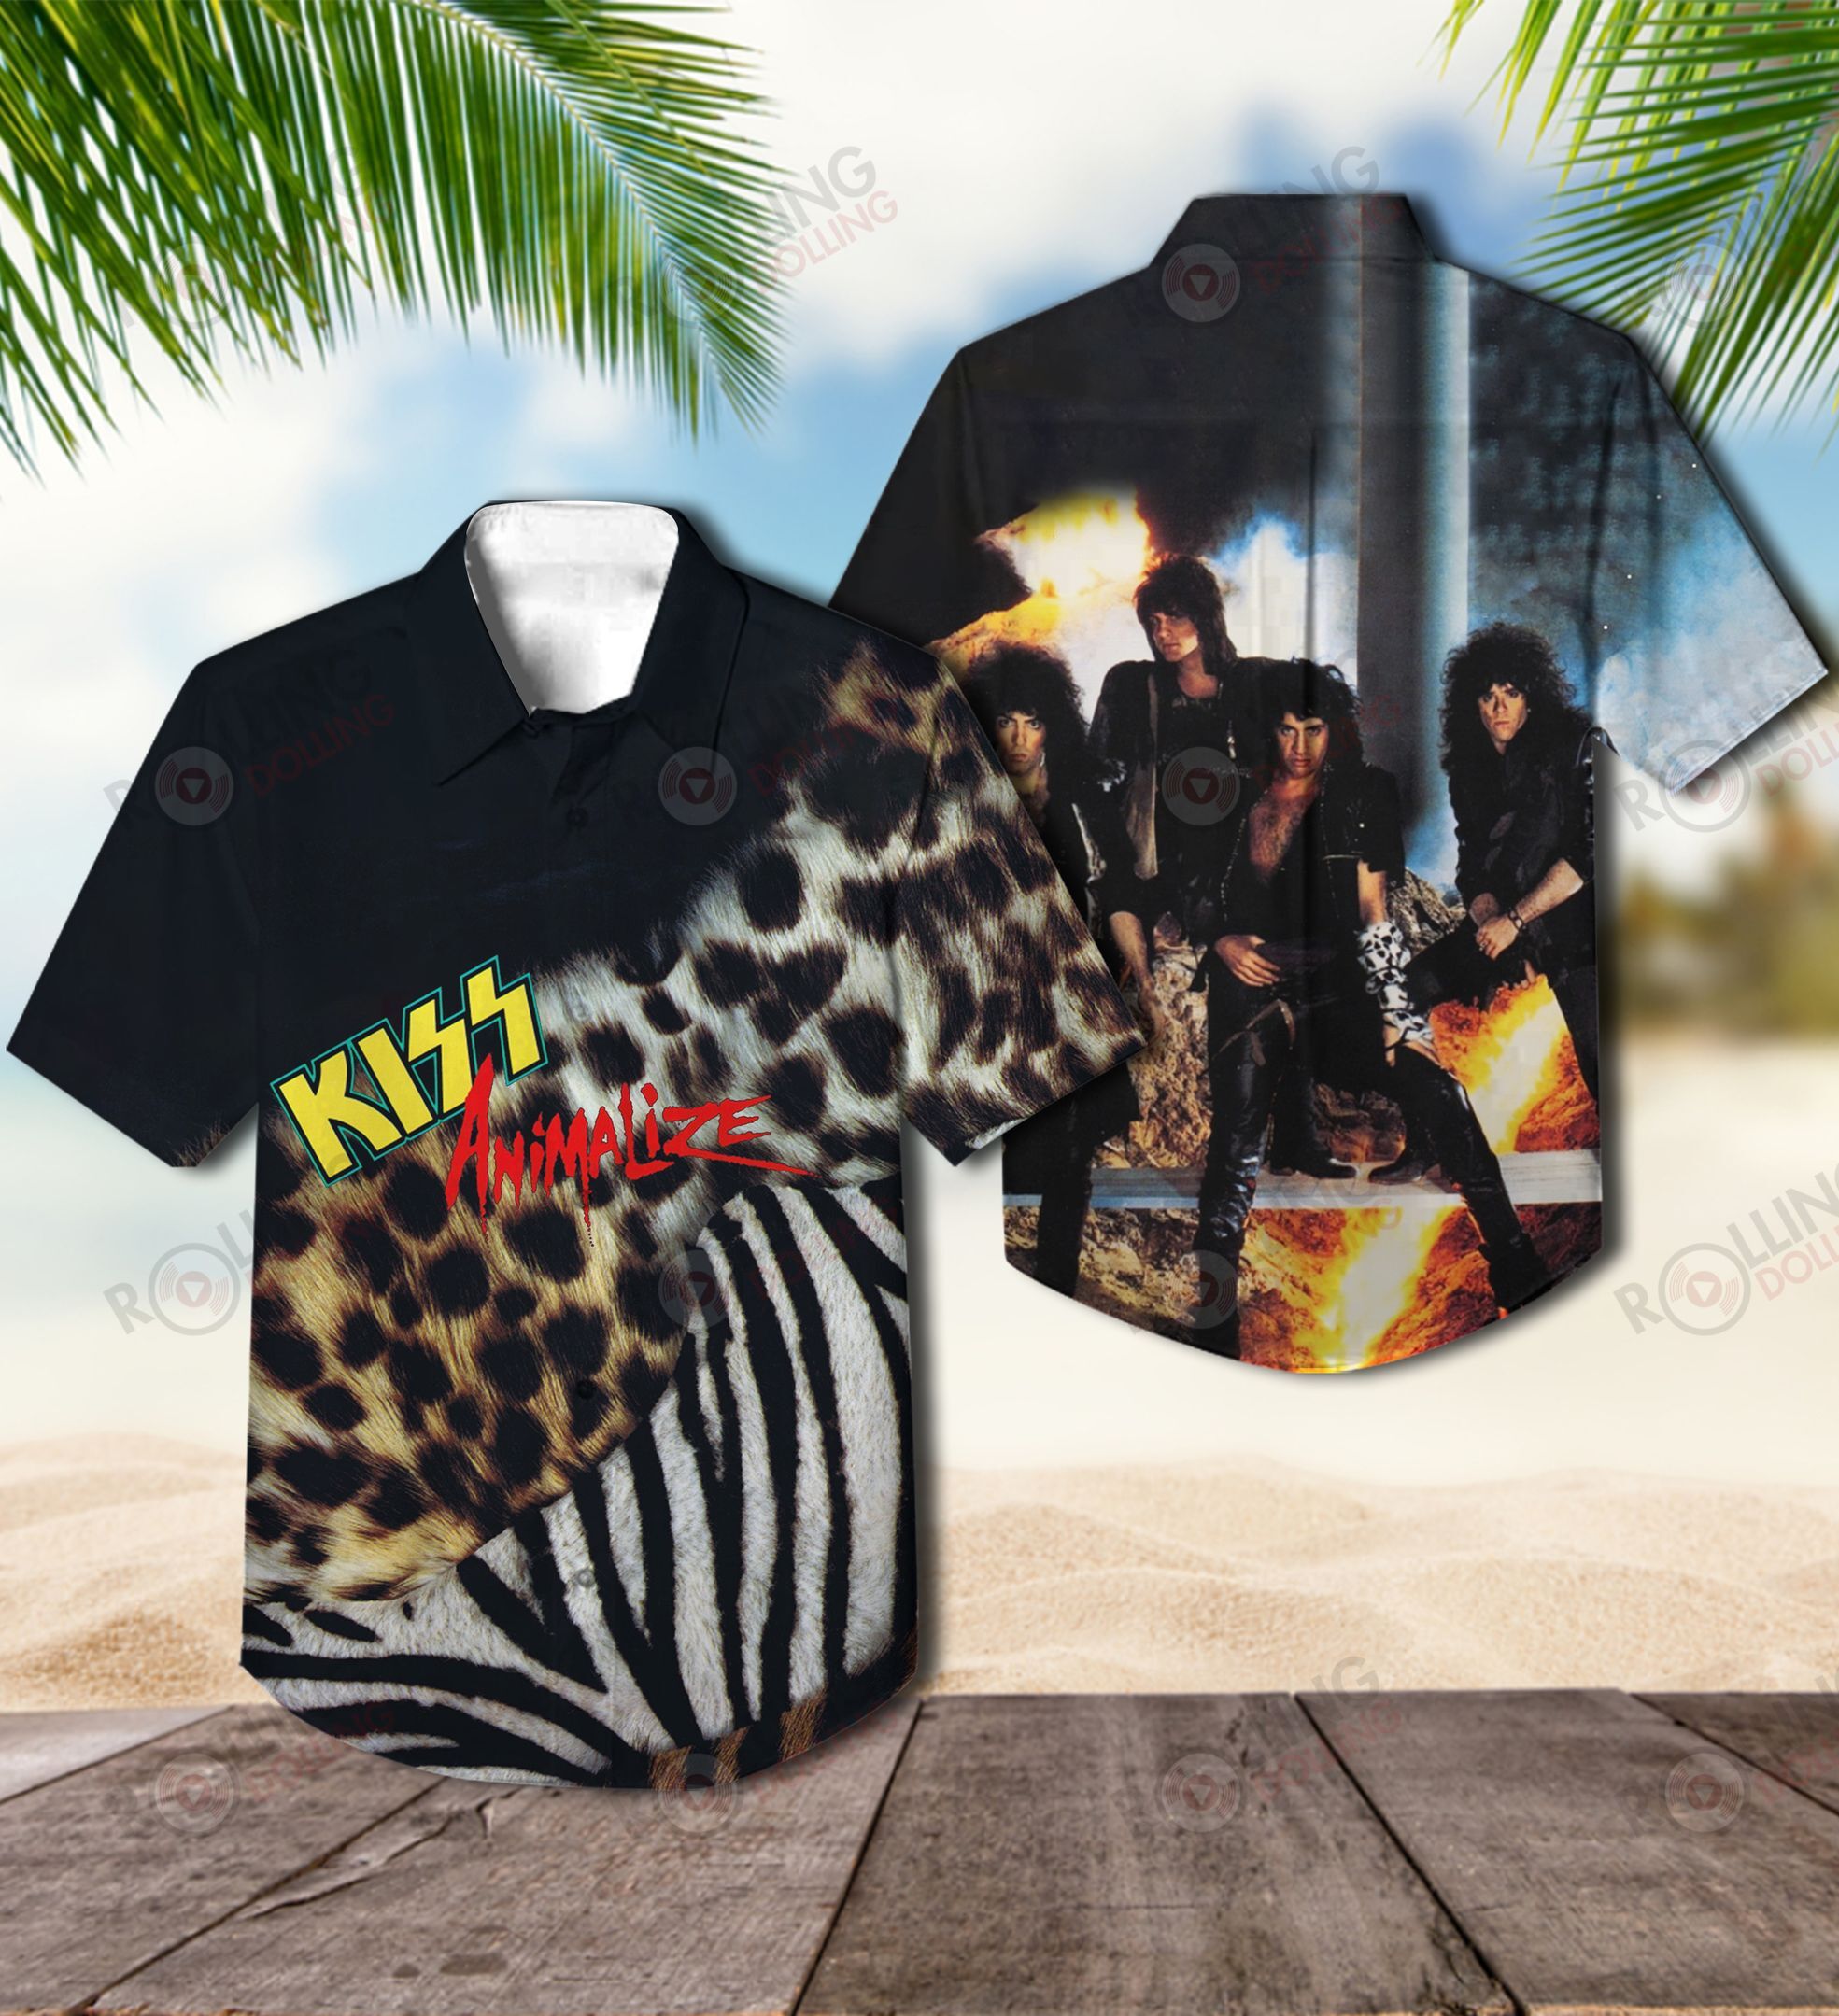 You'll have the perfect vacation outfit with this Hawaiian shirt 335